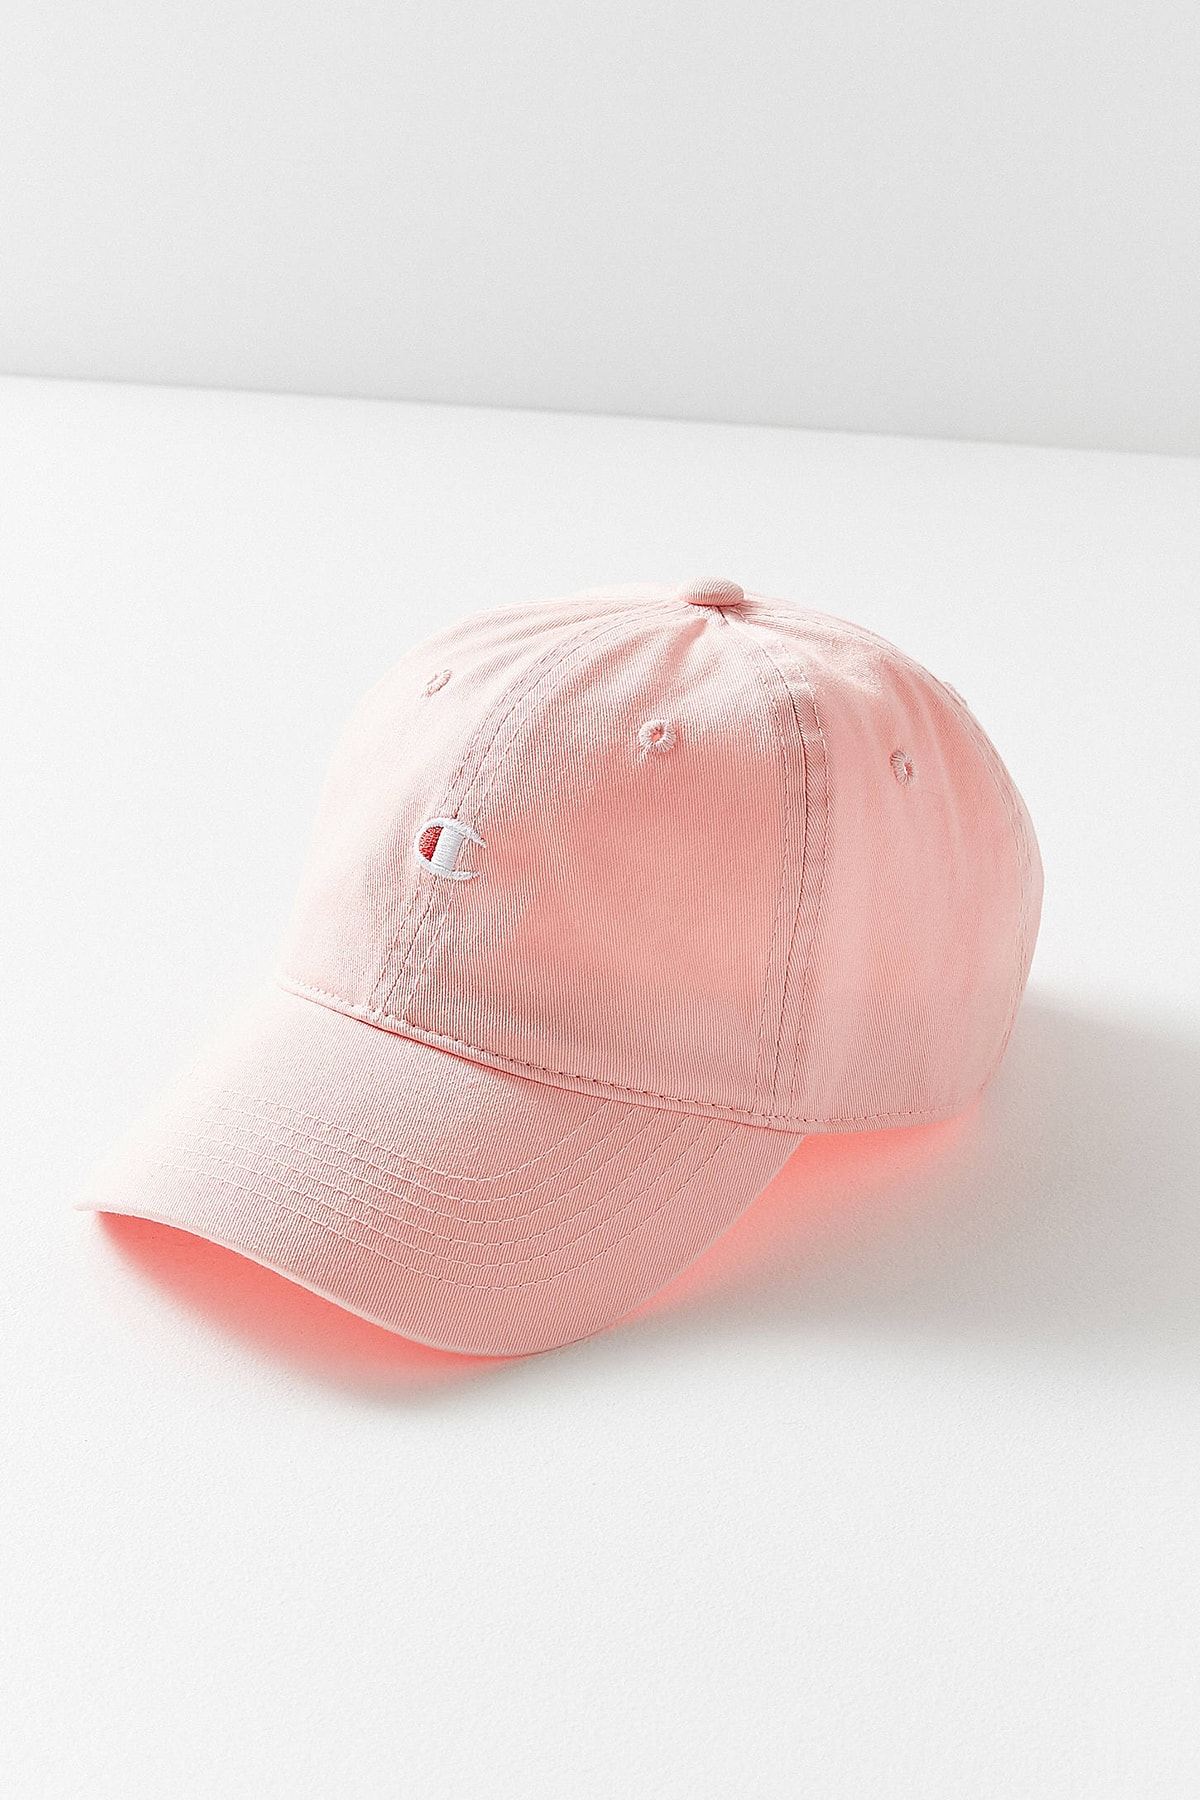 Champion Urban Outfitters Washed Twill Baseball Hat Cap Pink Logo